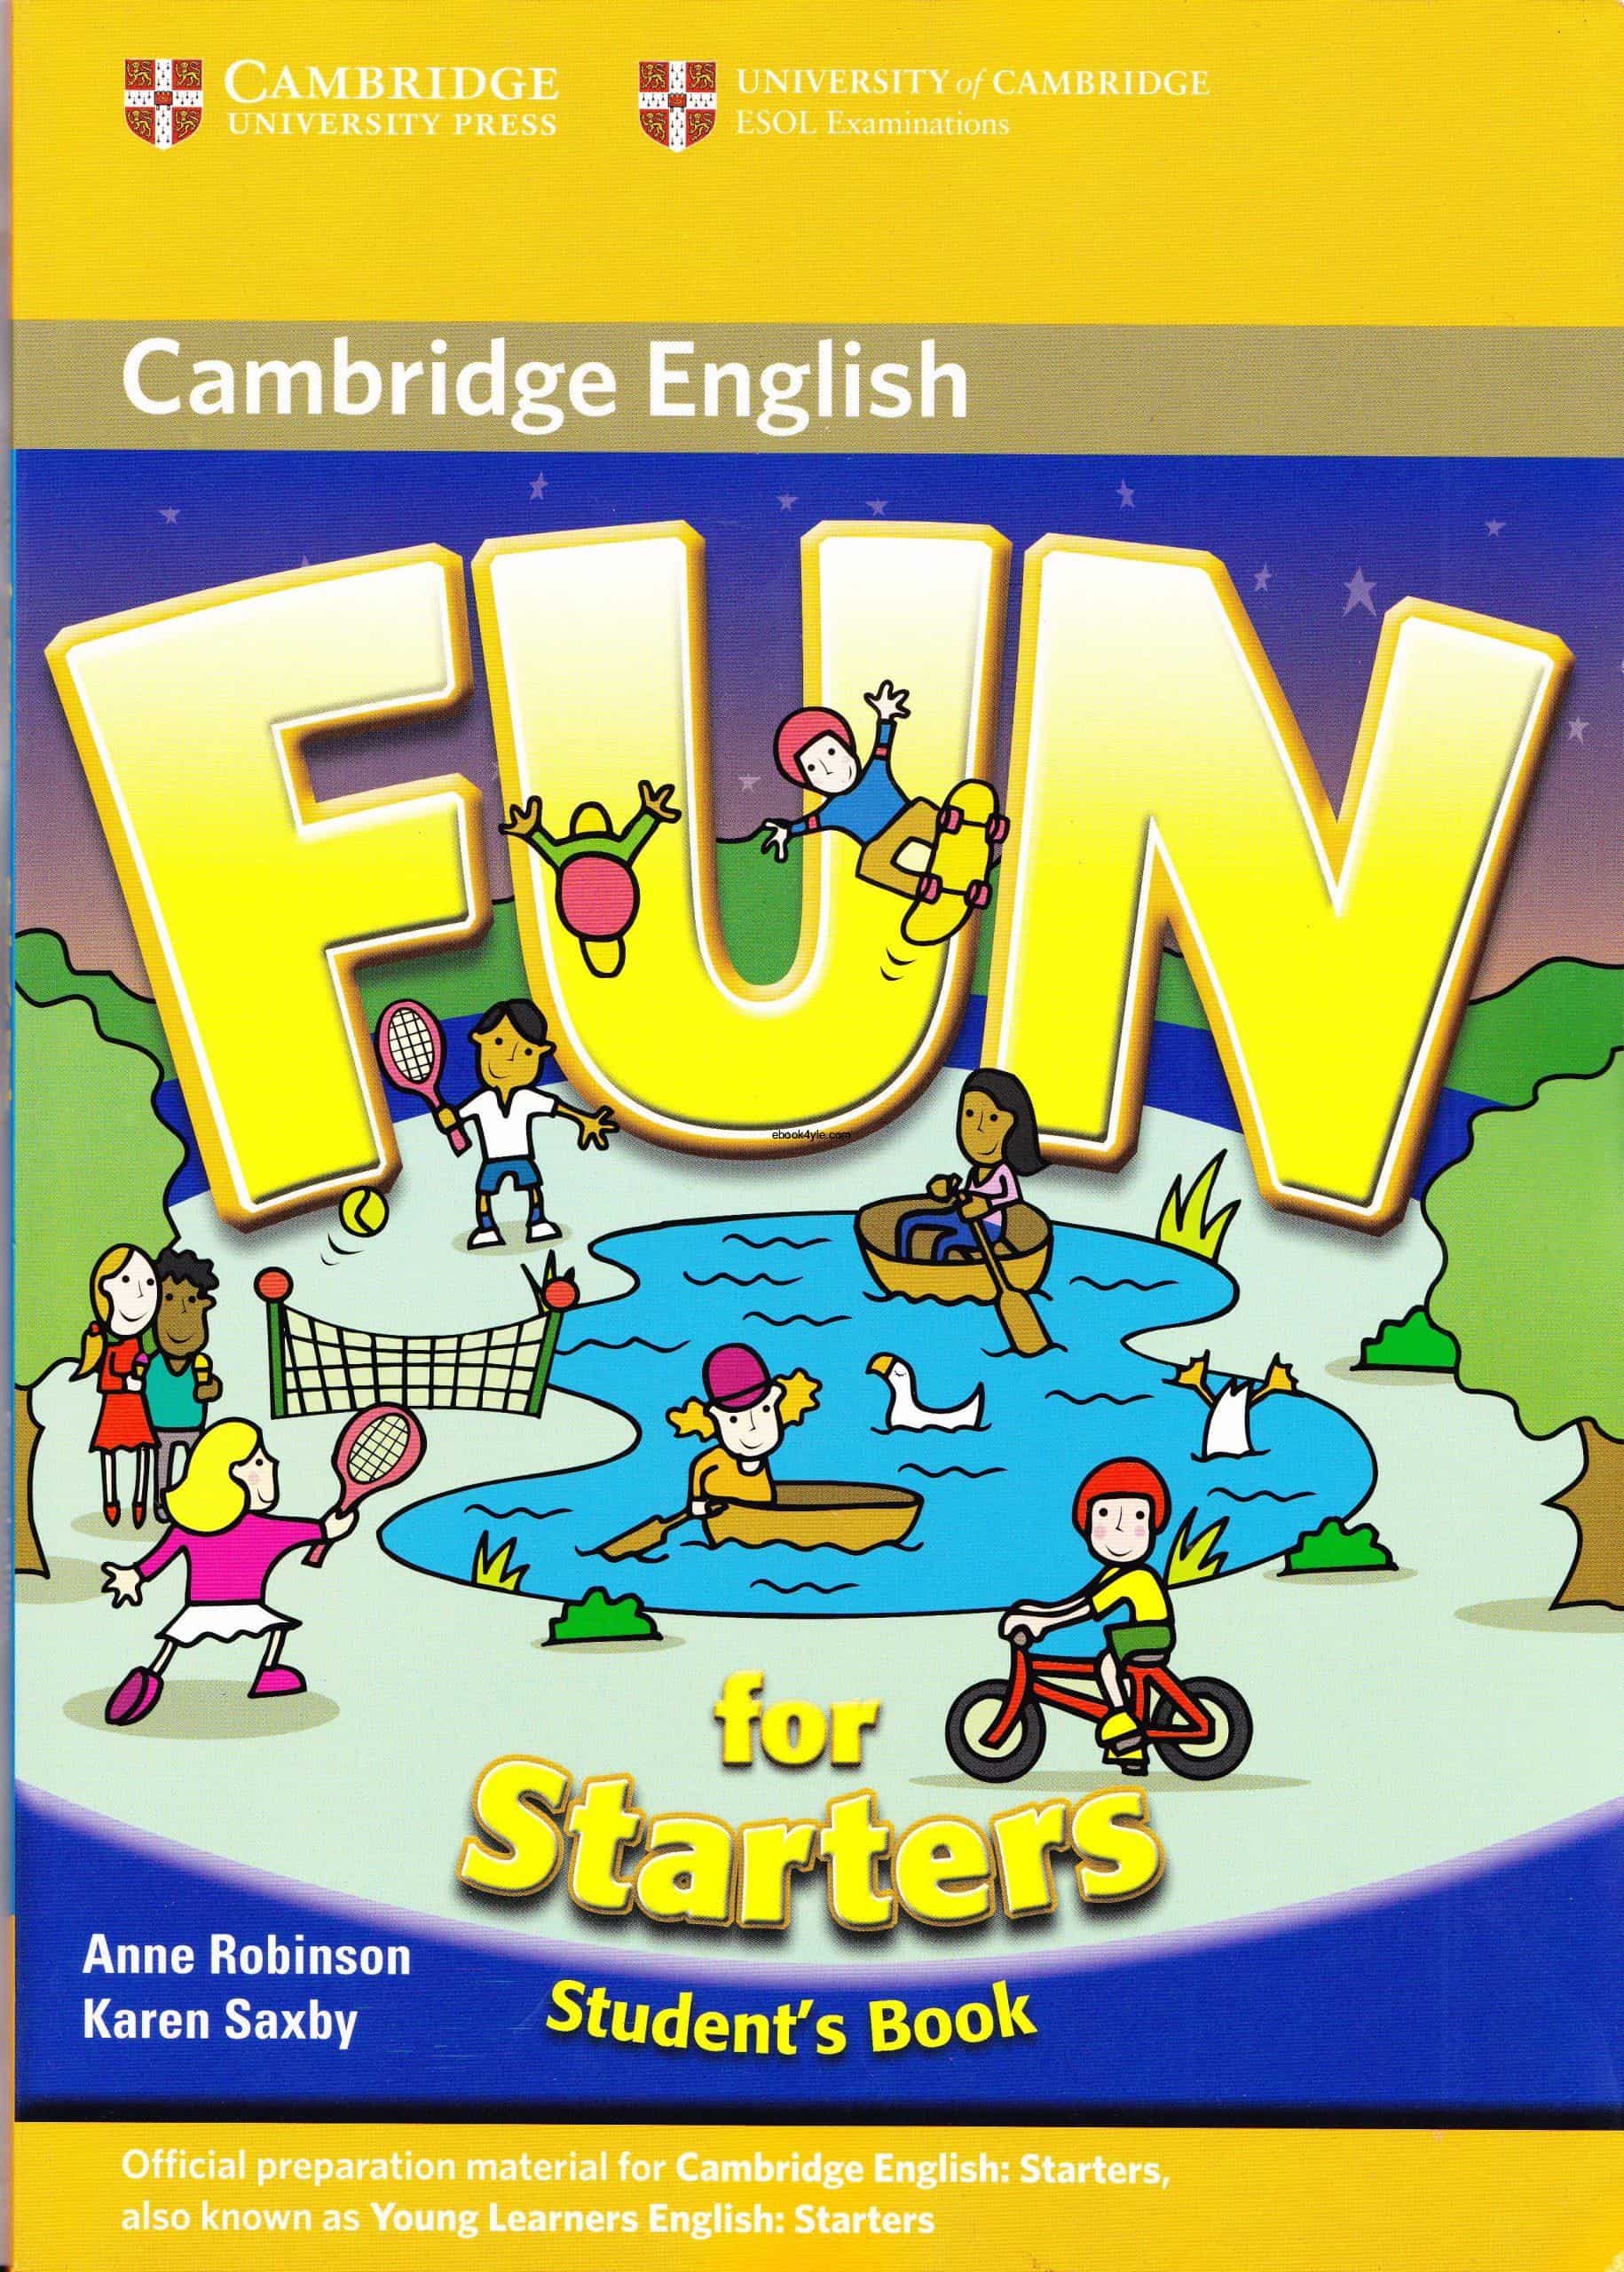 Cambridge Fun for Starters 2nd Edition Student Book